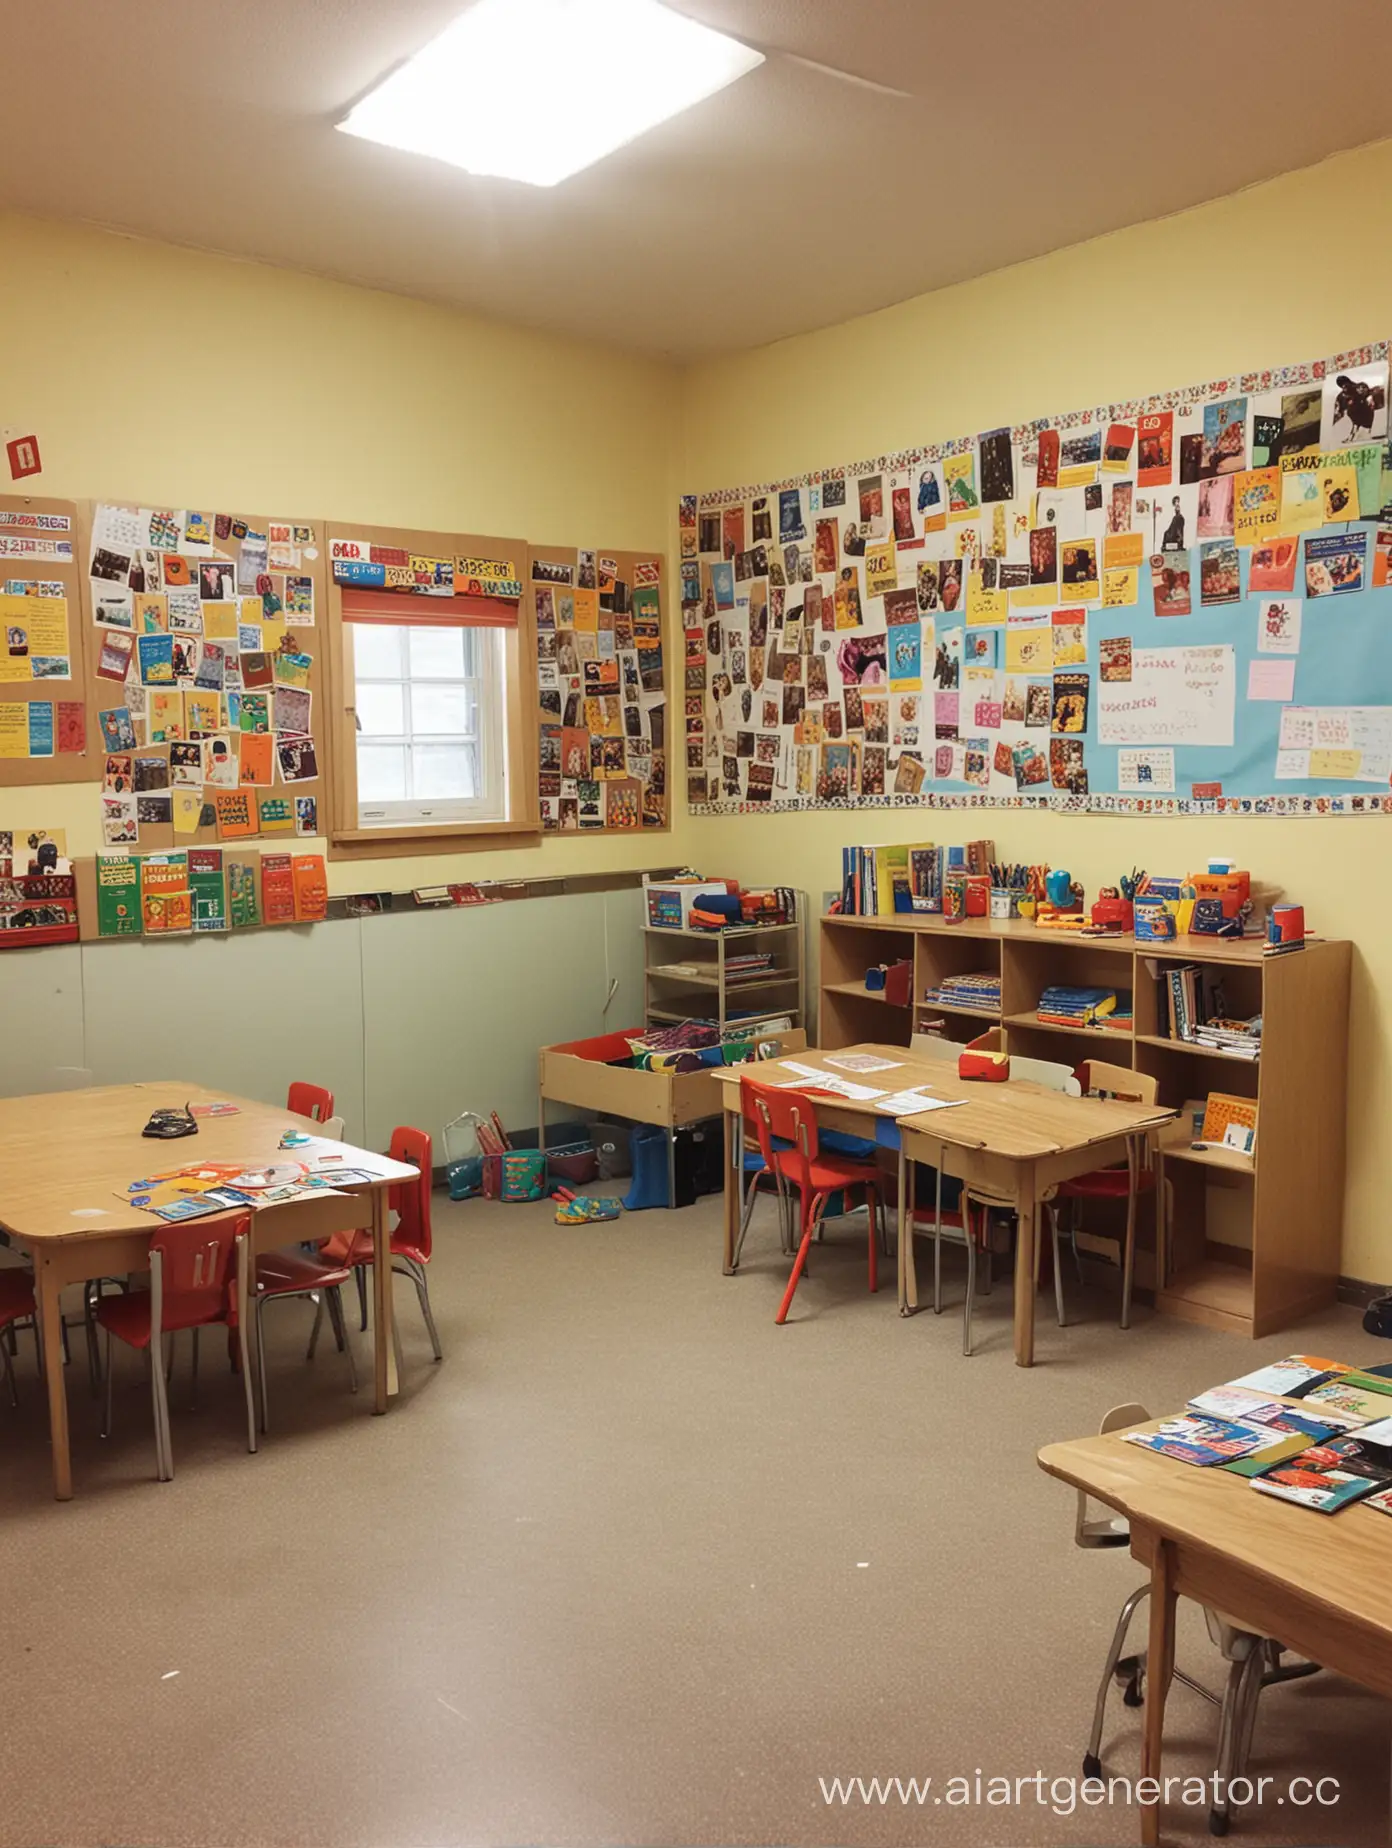 Nostalgic-Kindergarten-Classroom-with-Colorful-Decor-and-Learning-Materials